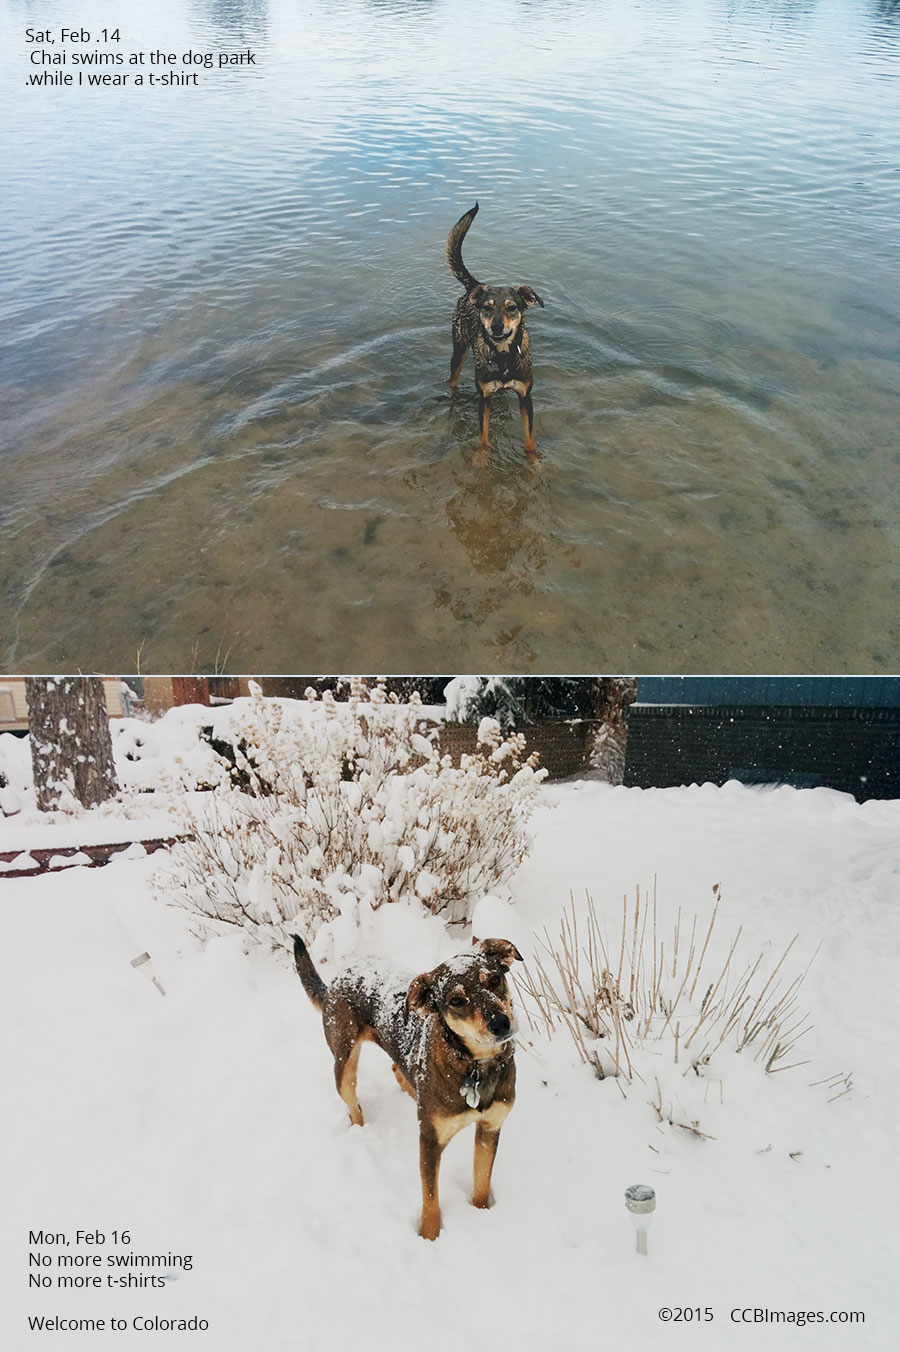 My dog in water and snow